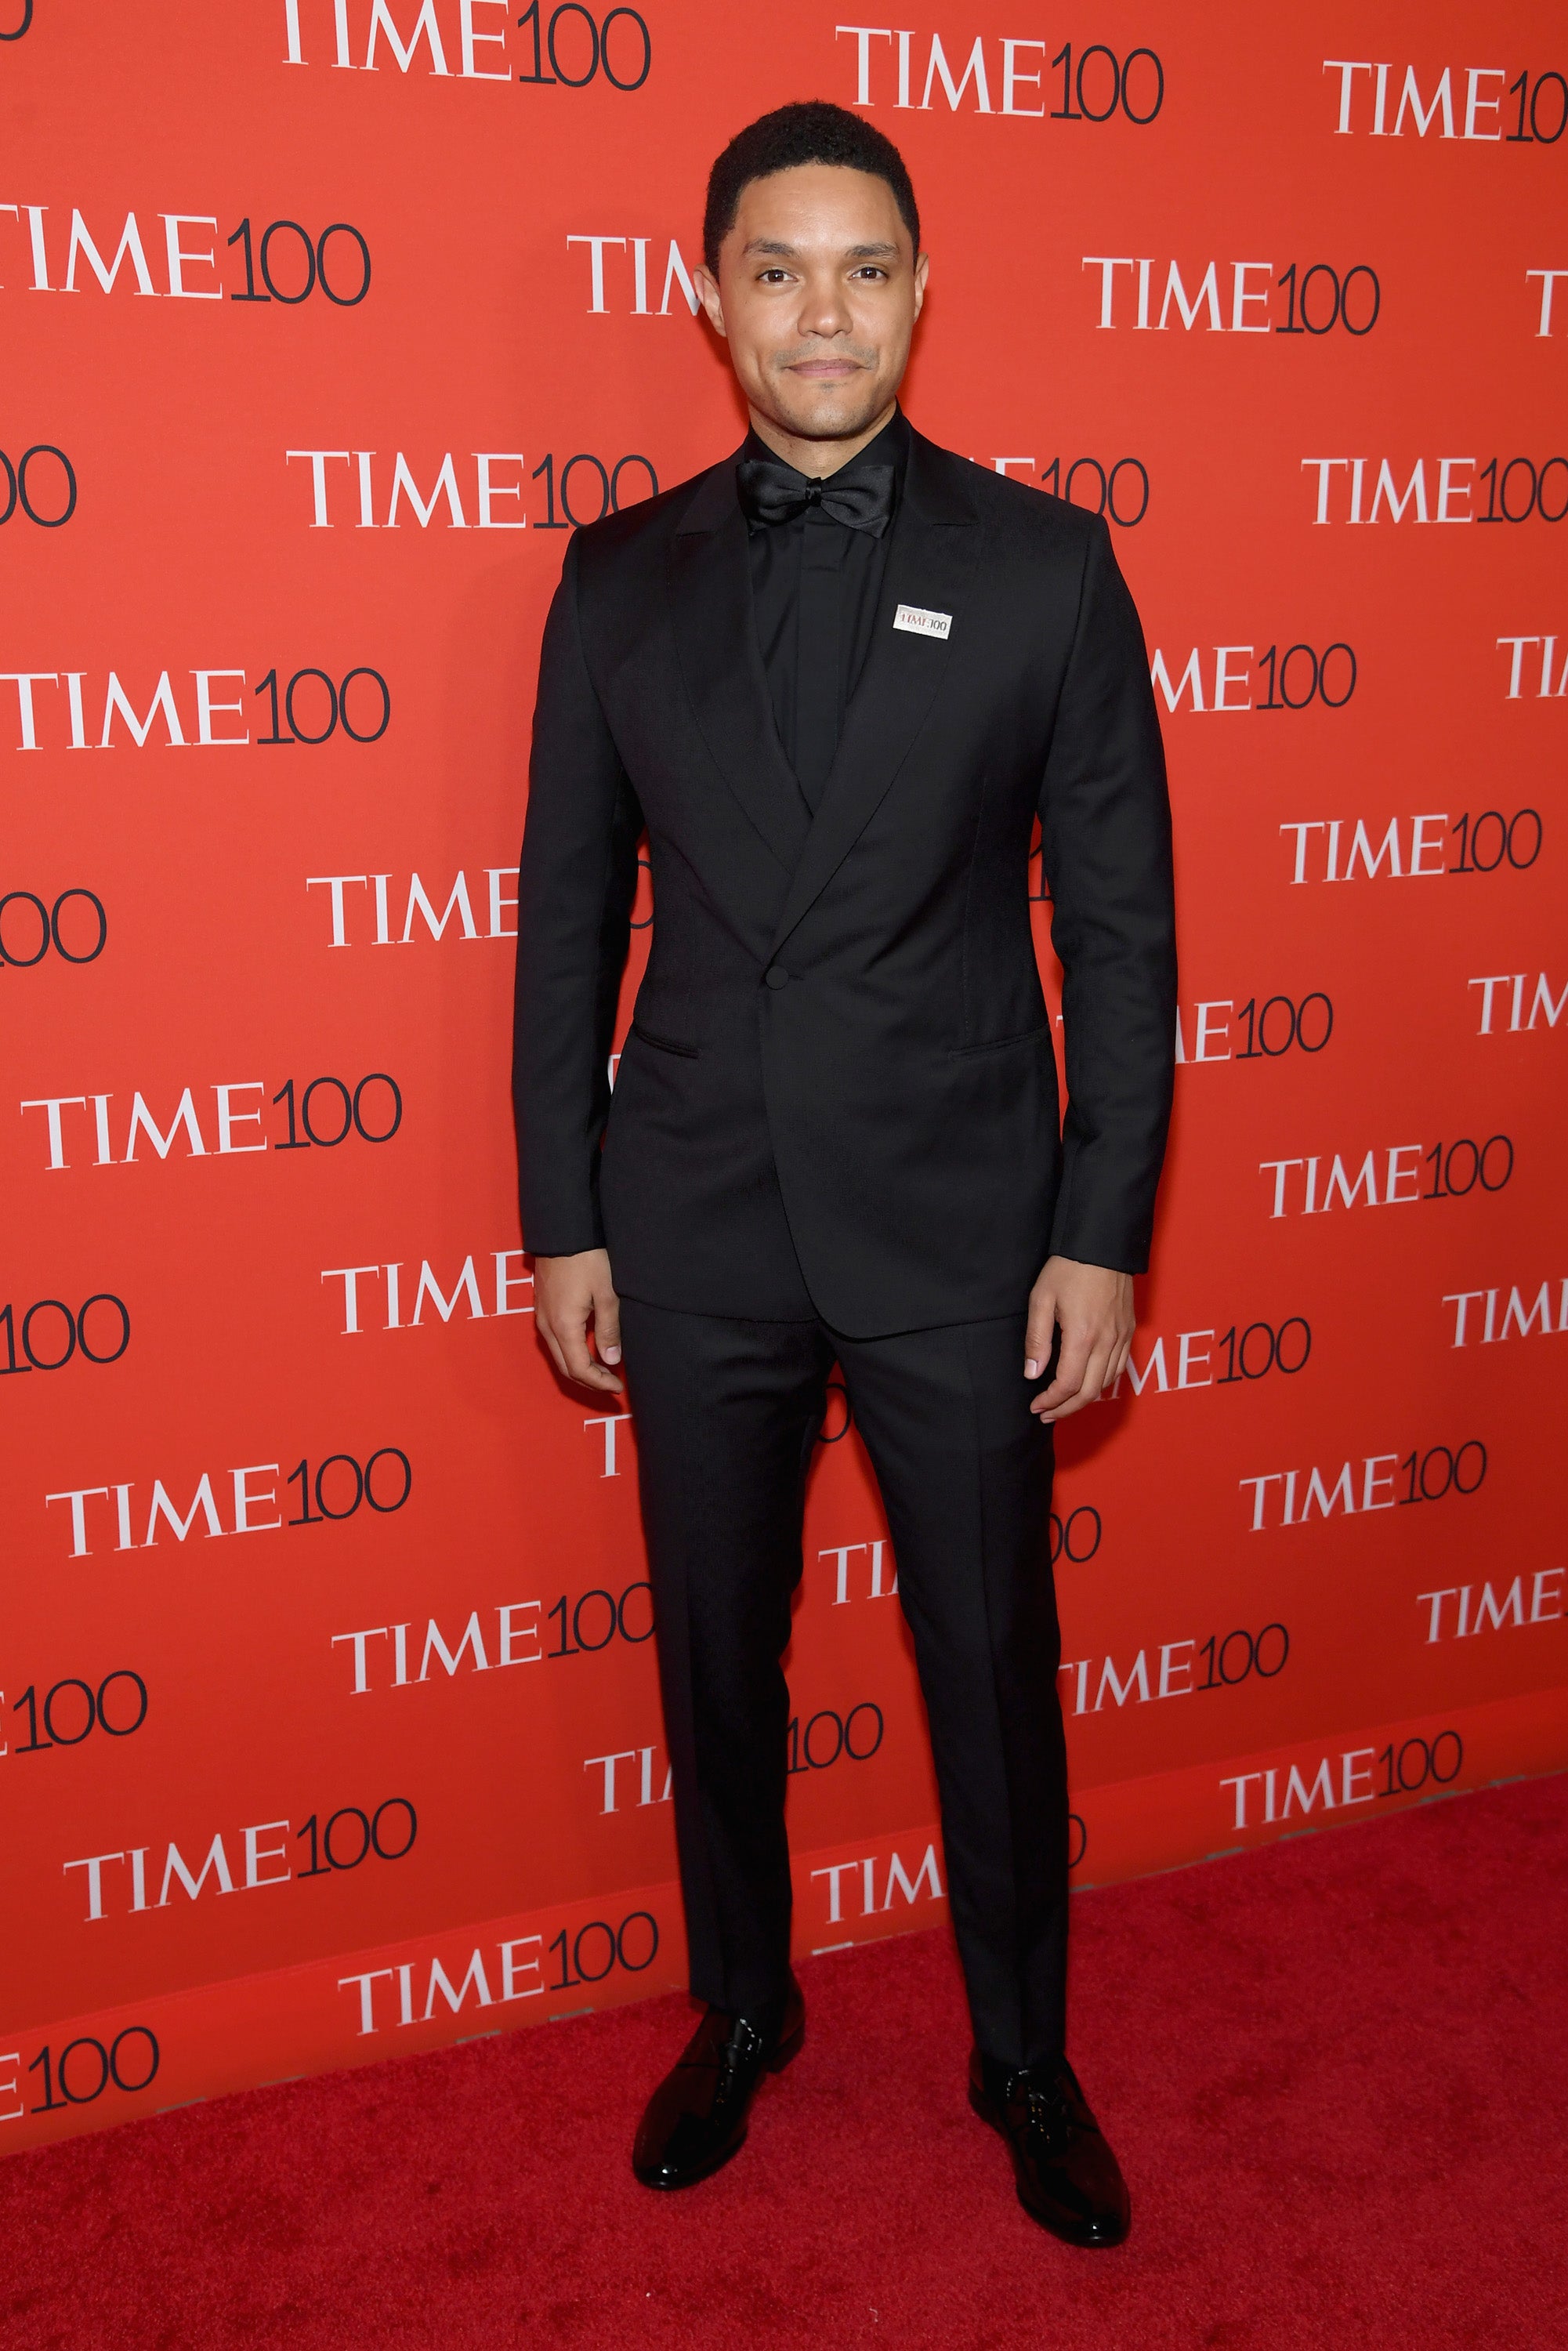 ICYMI: Lena Waithe, Yara Shahidi, Sterling K Brown, Congresswoman Maxine Waters and more attend Time 100 Gala 
